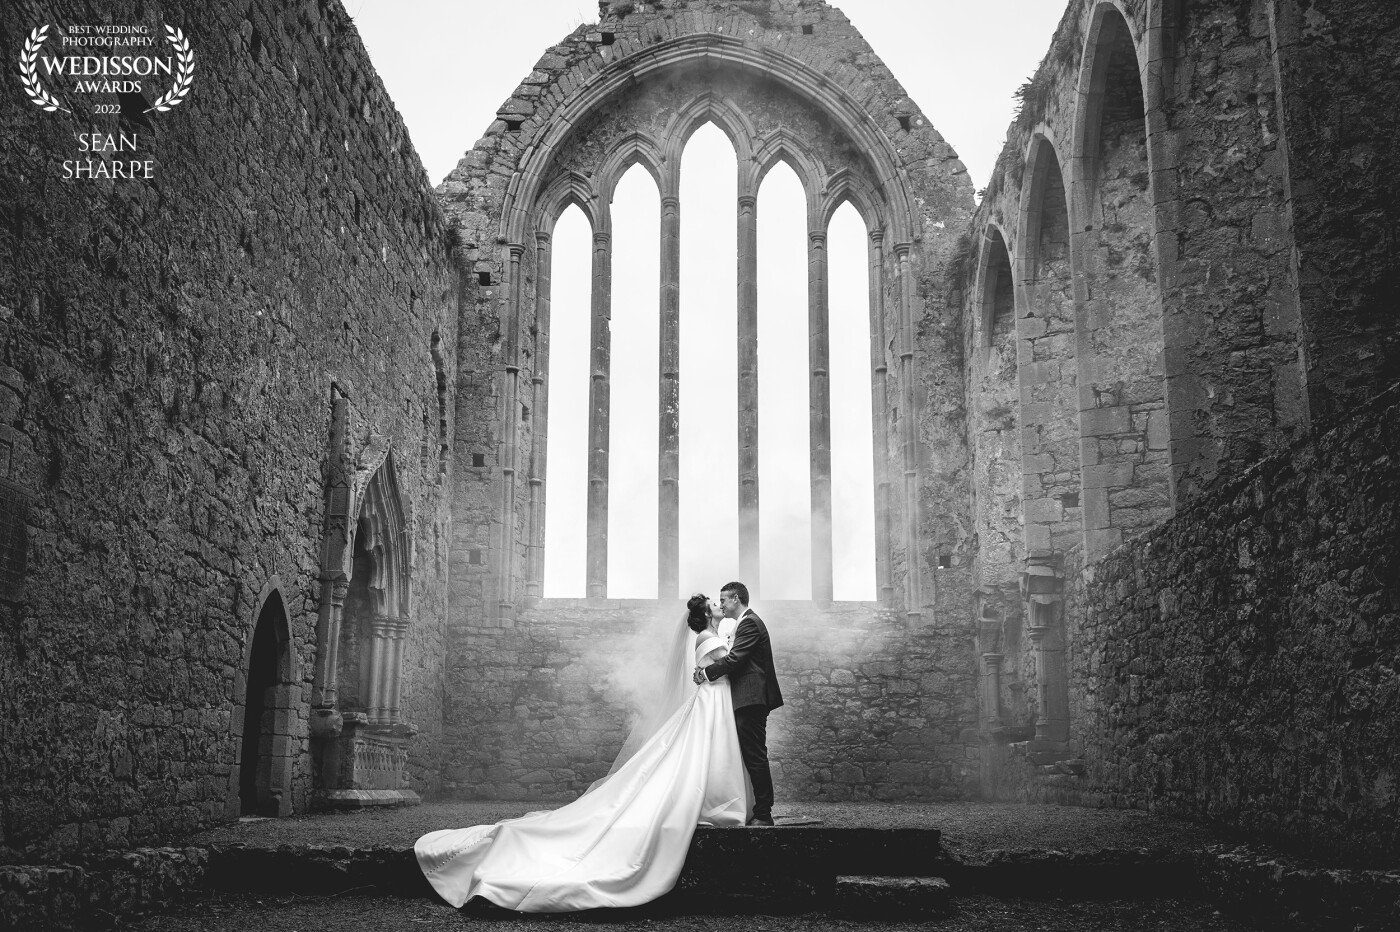 What a fantastic day with Eimear and Dave in January! Taken at the beautiful Kilmallock Abbey, Co. Limerick, shot with a white smoke bomb behind to create a light fog effect.